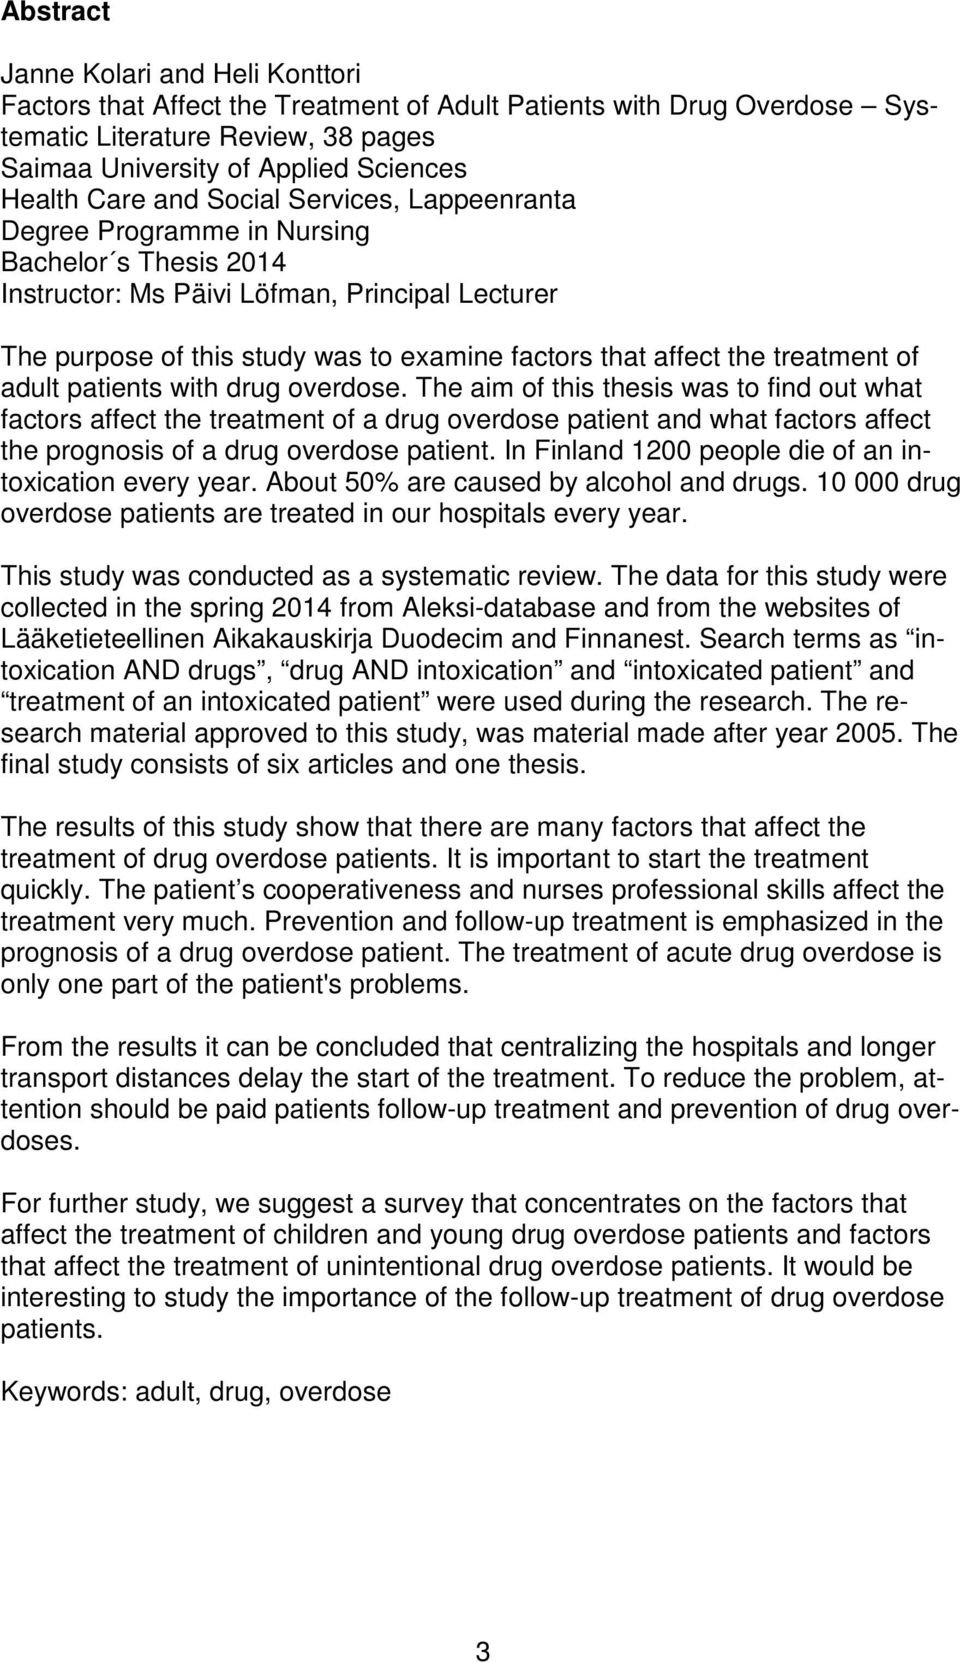 treatment of adult patients with drug overdose.